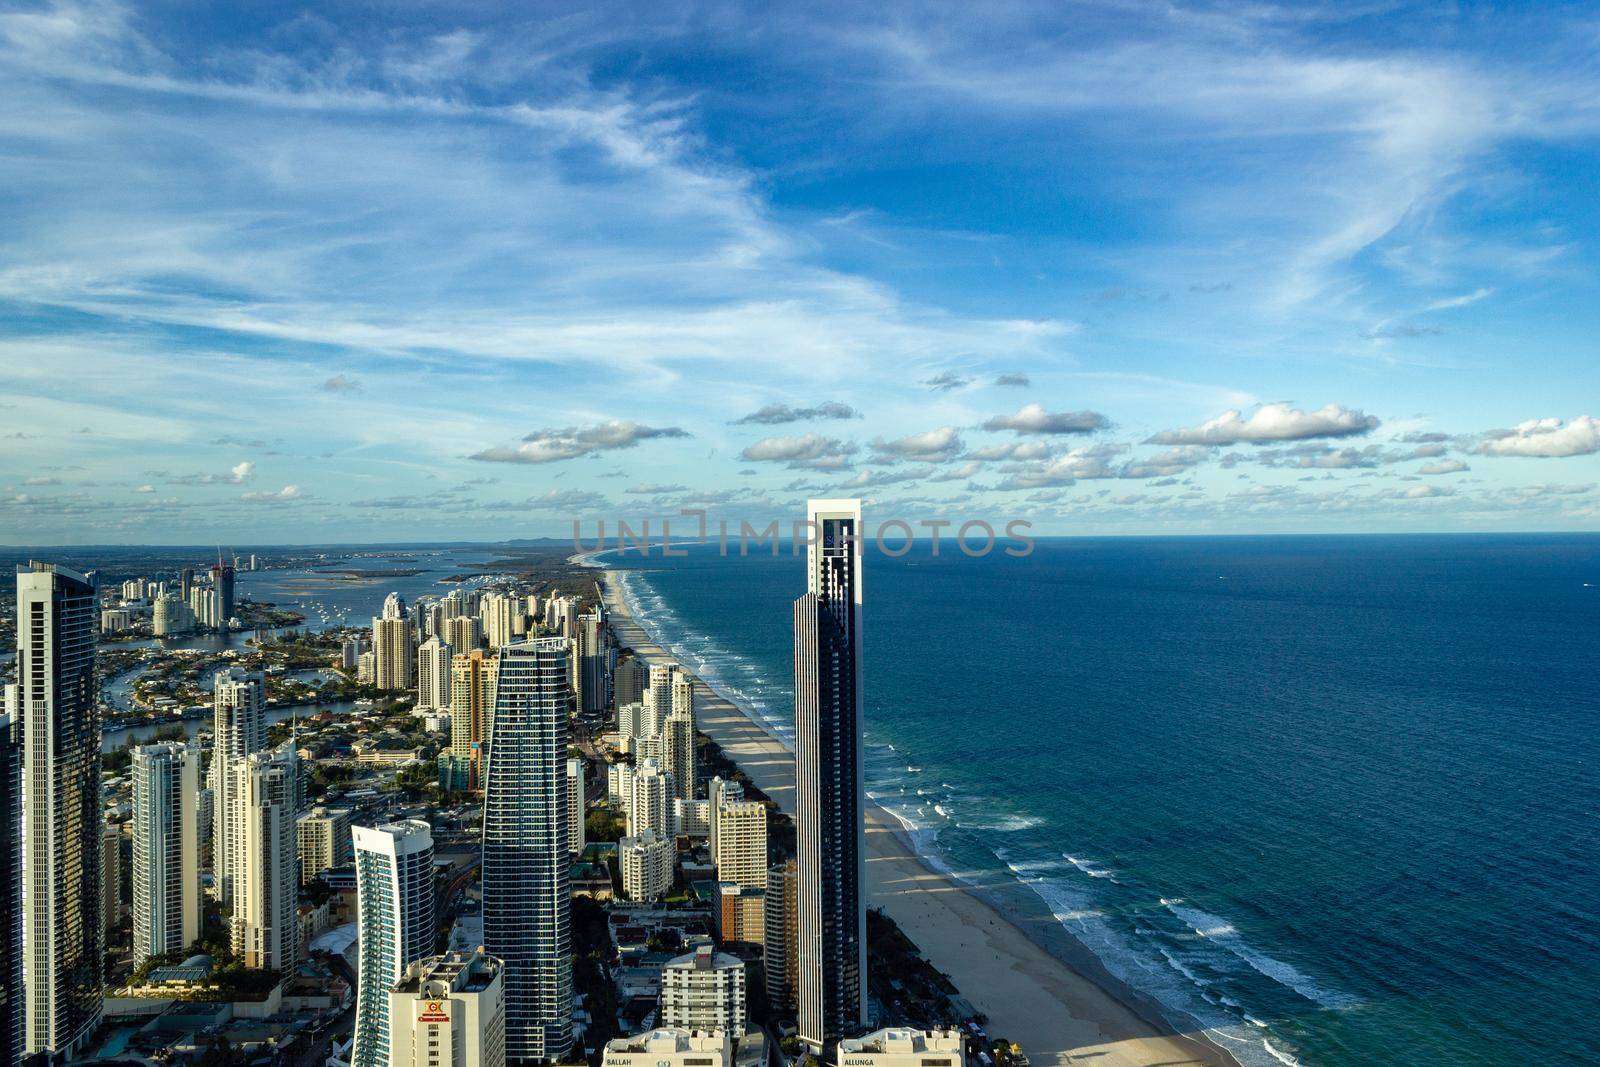 Aerial view over surfers paradise city and beach. Modern aerial cityscape of resort town and beach. Gold Coast, Surfers Paradise, australia. by bettercallcurry